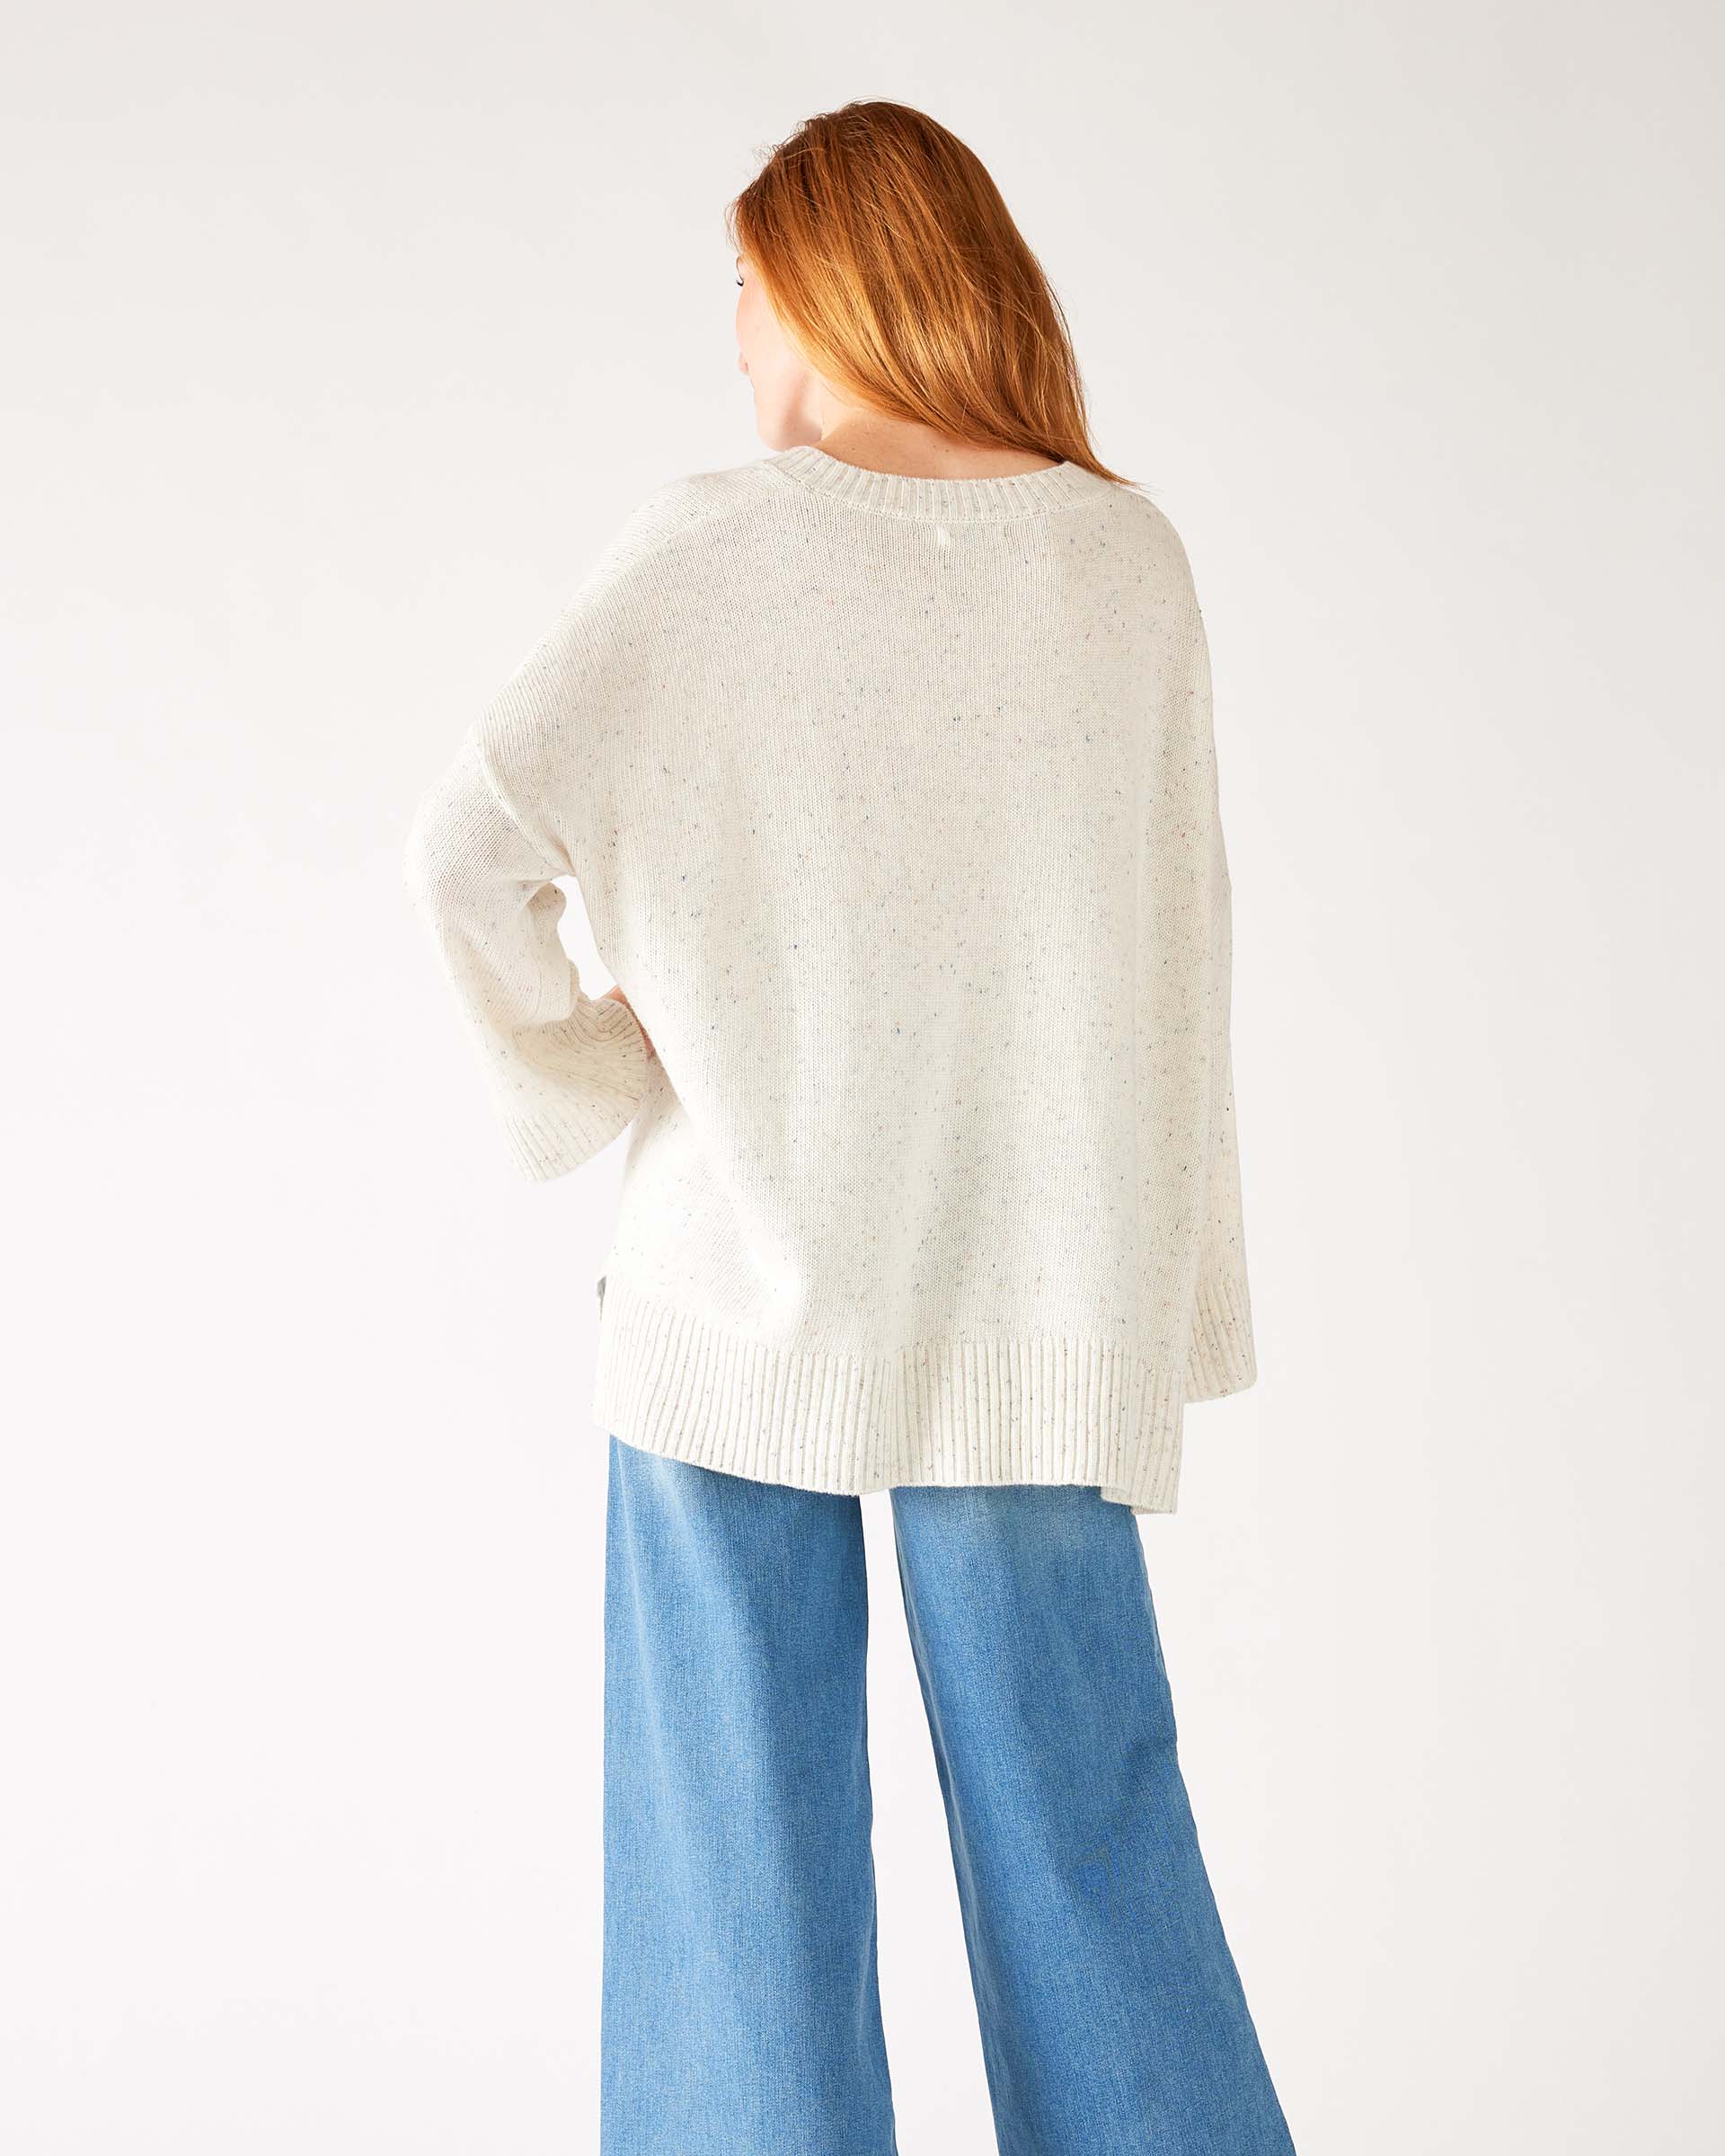 rearview of woman wearing mersea montauk v-neck sweater with wide sleeves in cream color